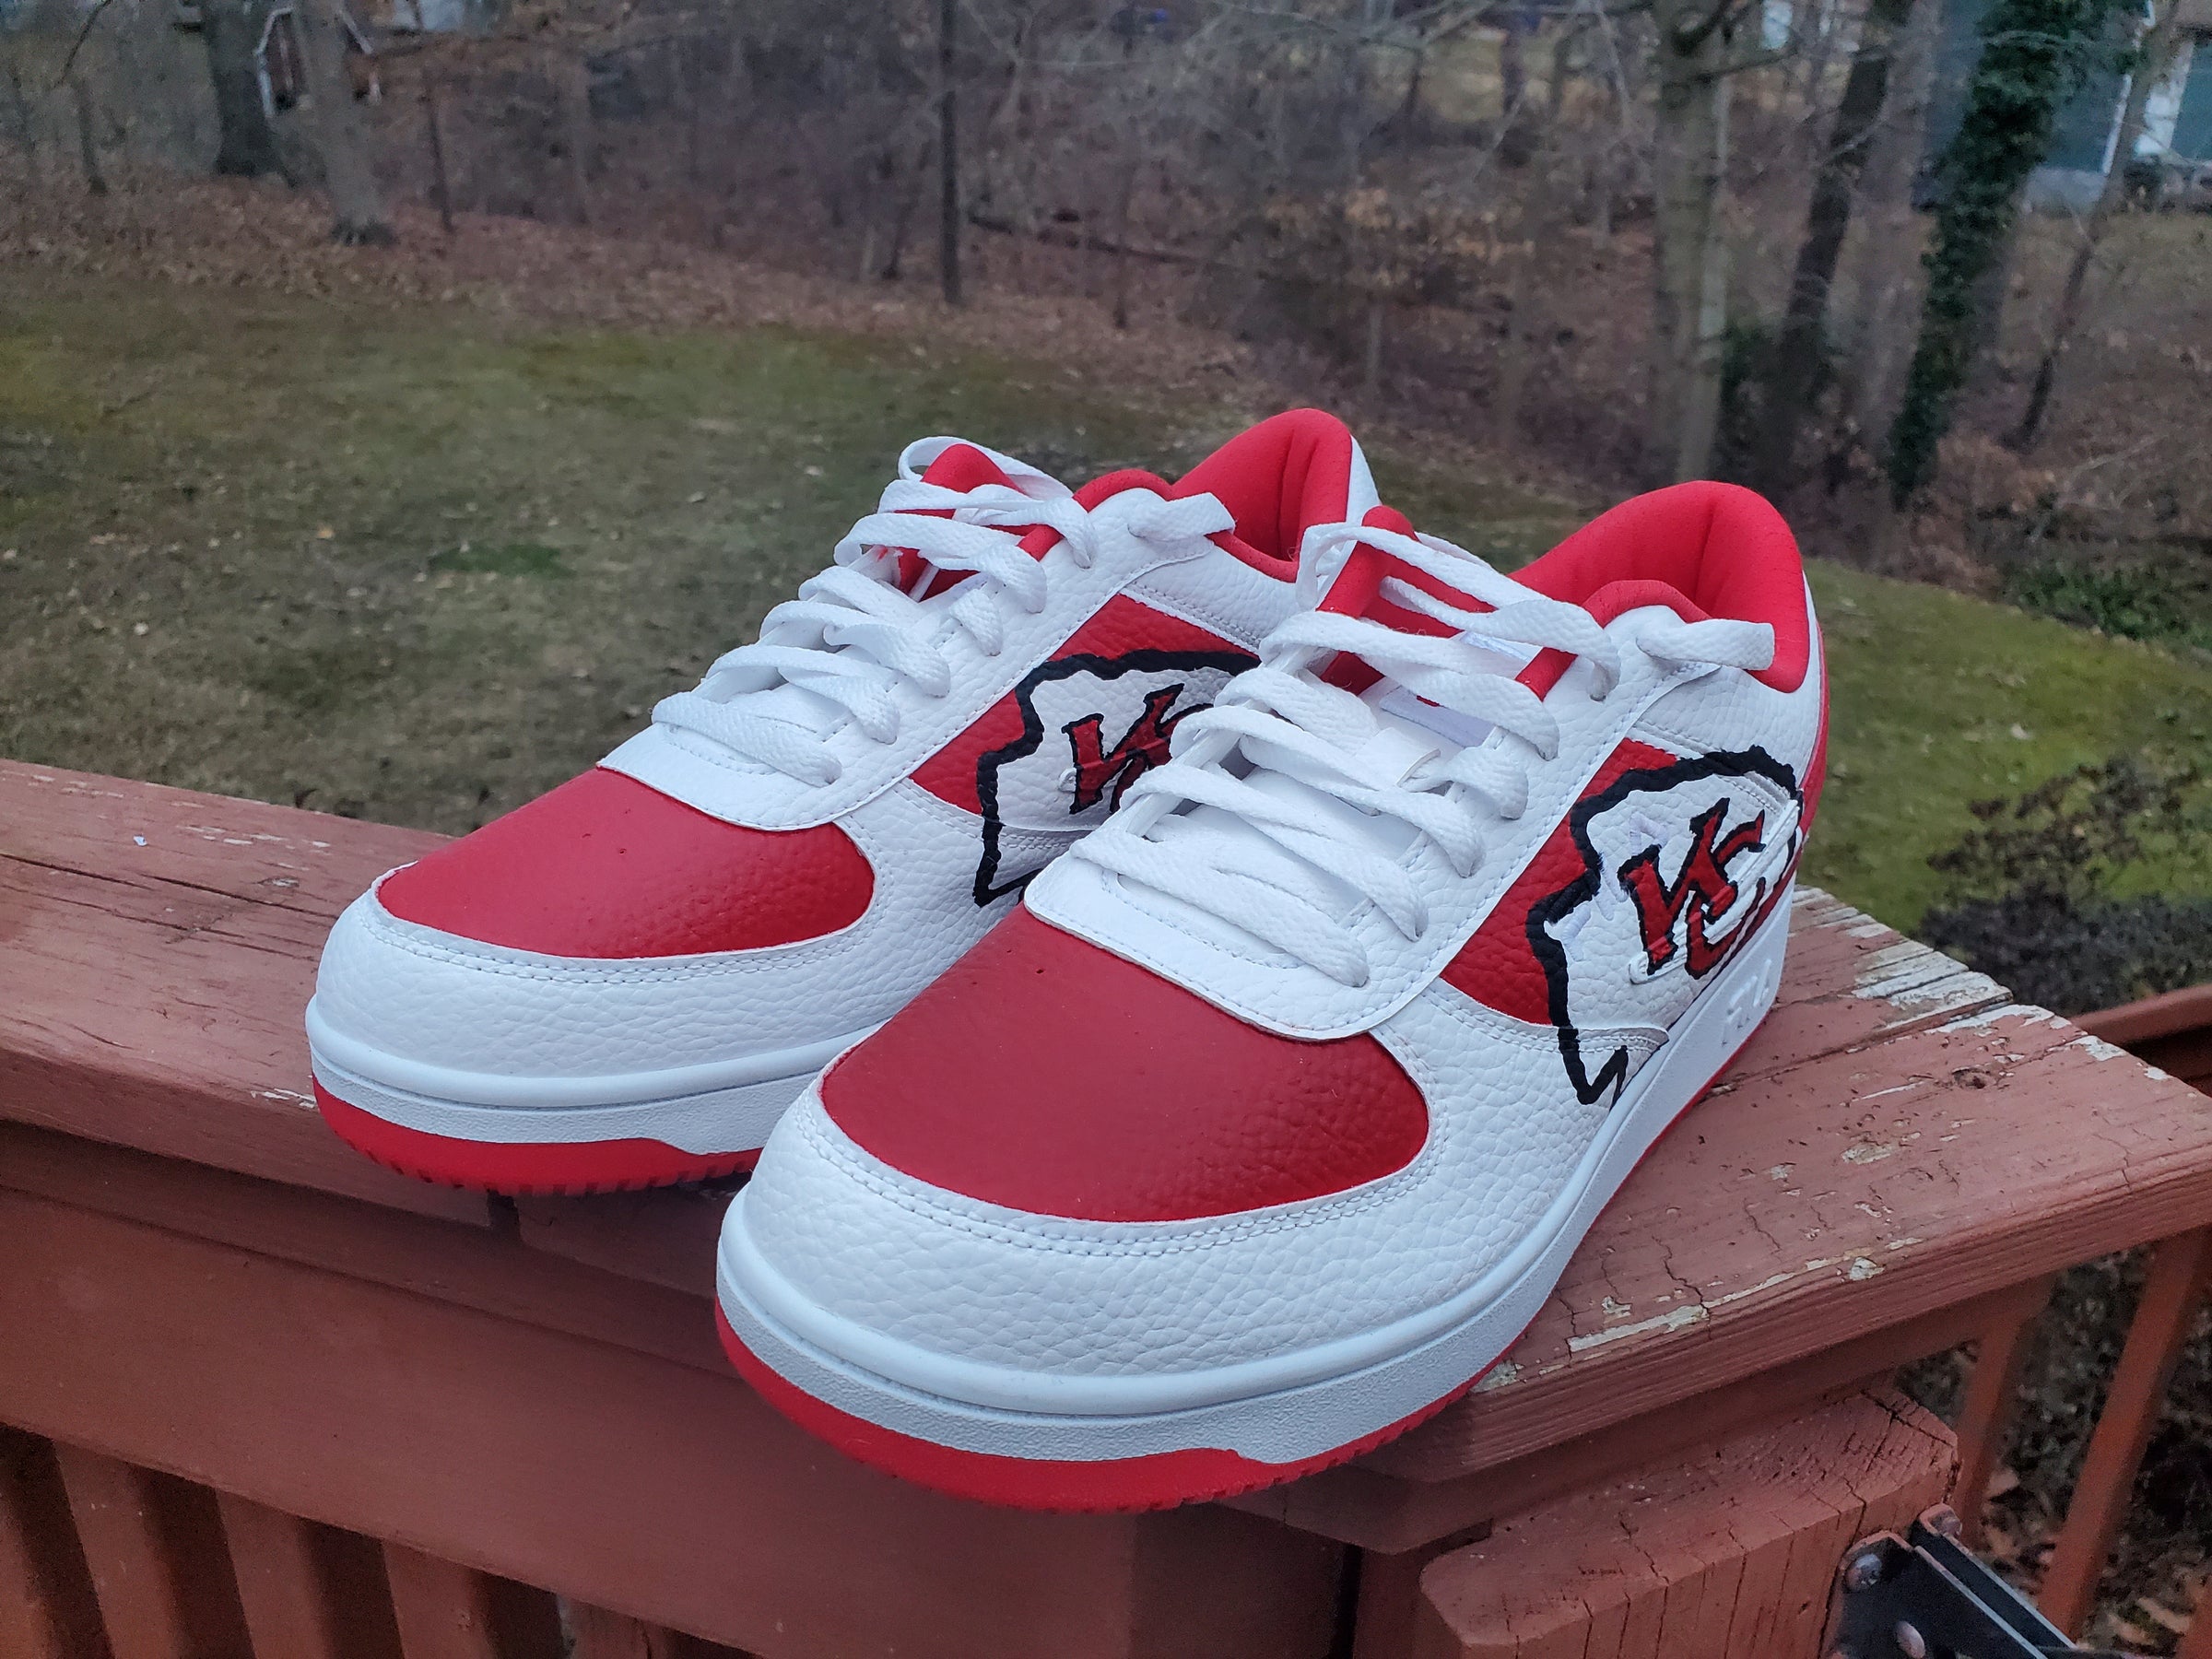 Customized and Restored Sneakers